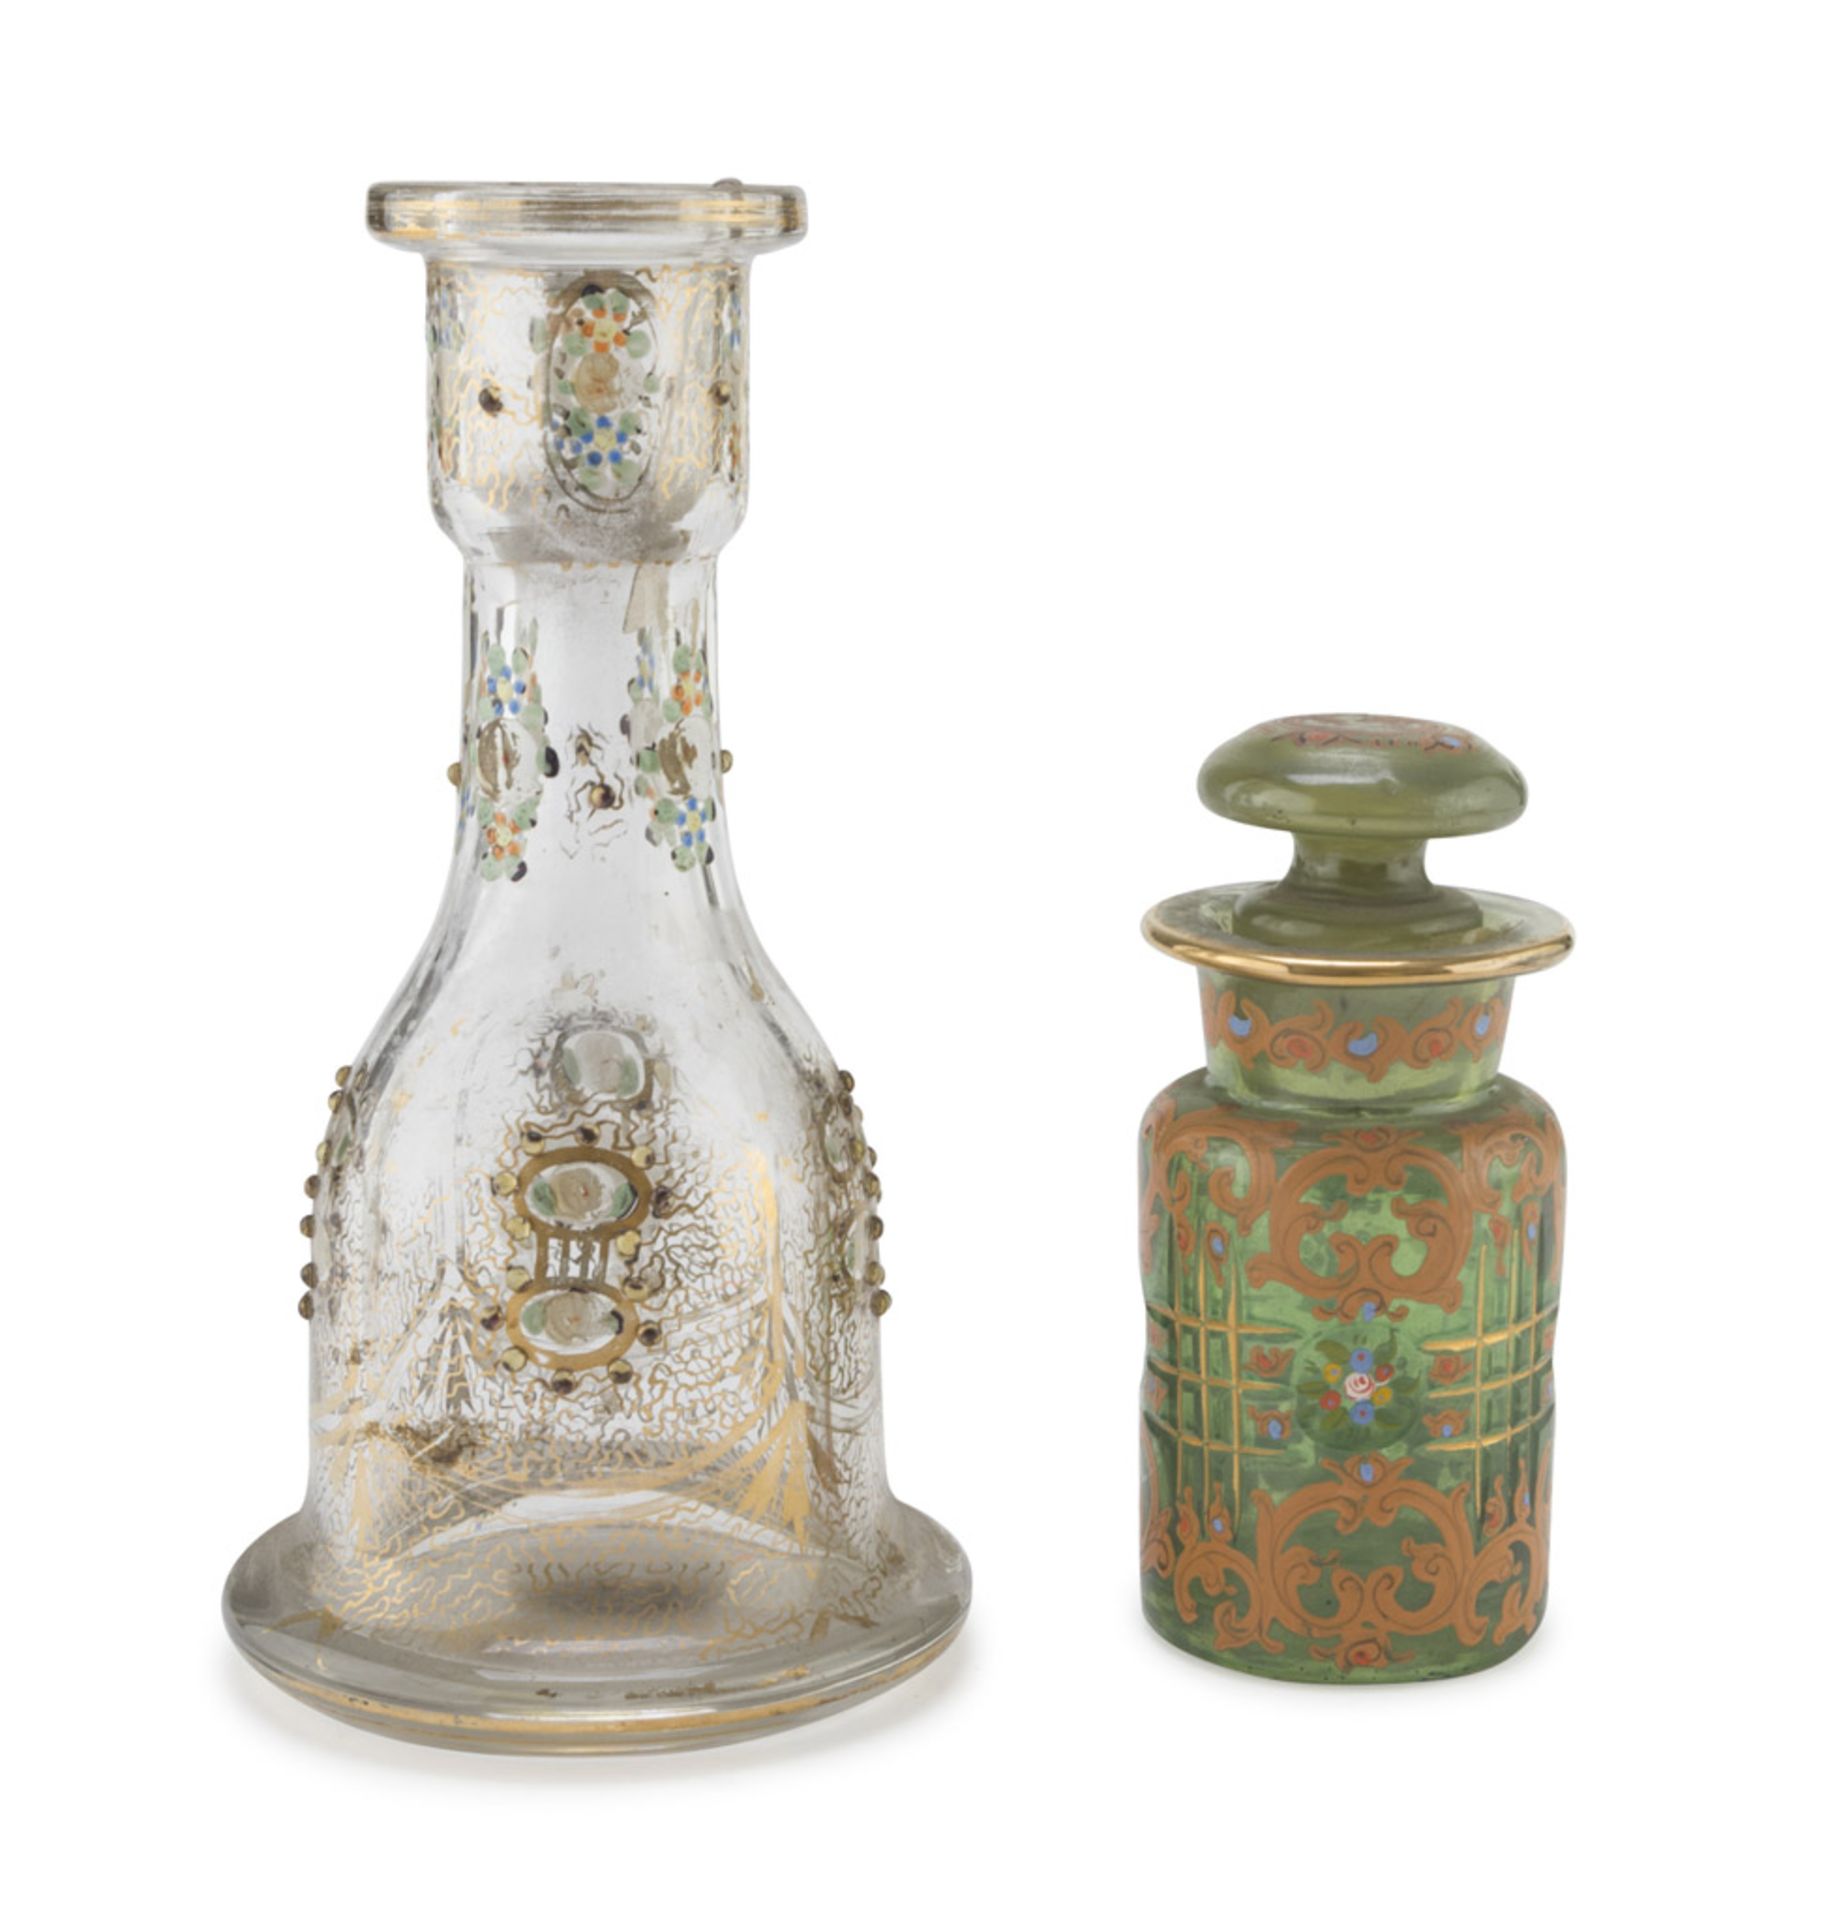 GLASS BOTTLE AND PERFUME BOTTLE, LATE 19TH CENTURY polychrome painted. Measures bottle cm. 29 x